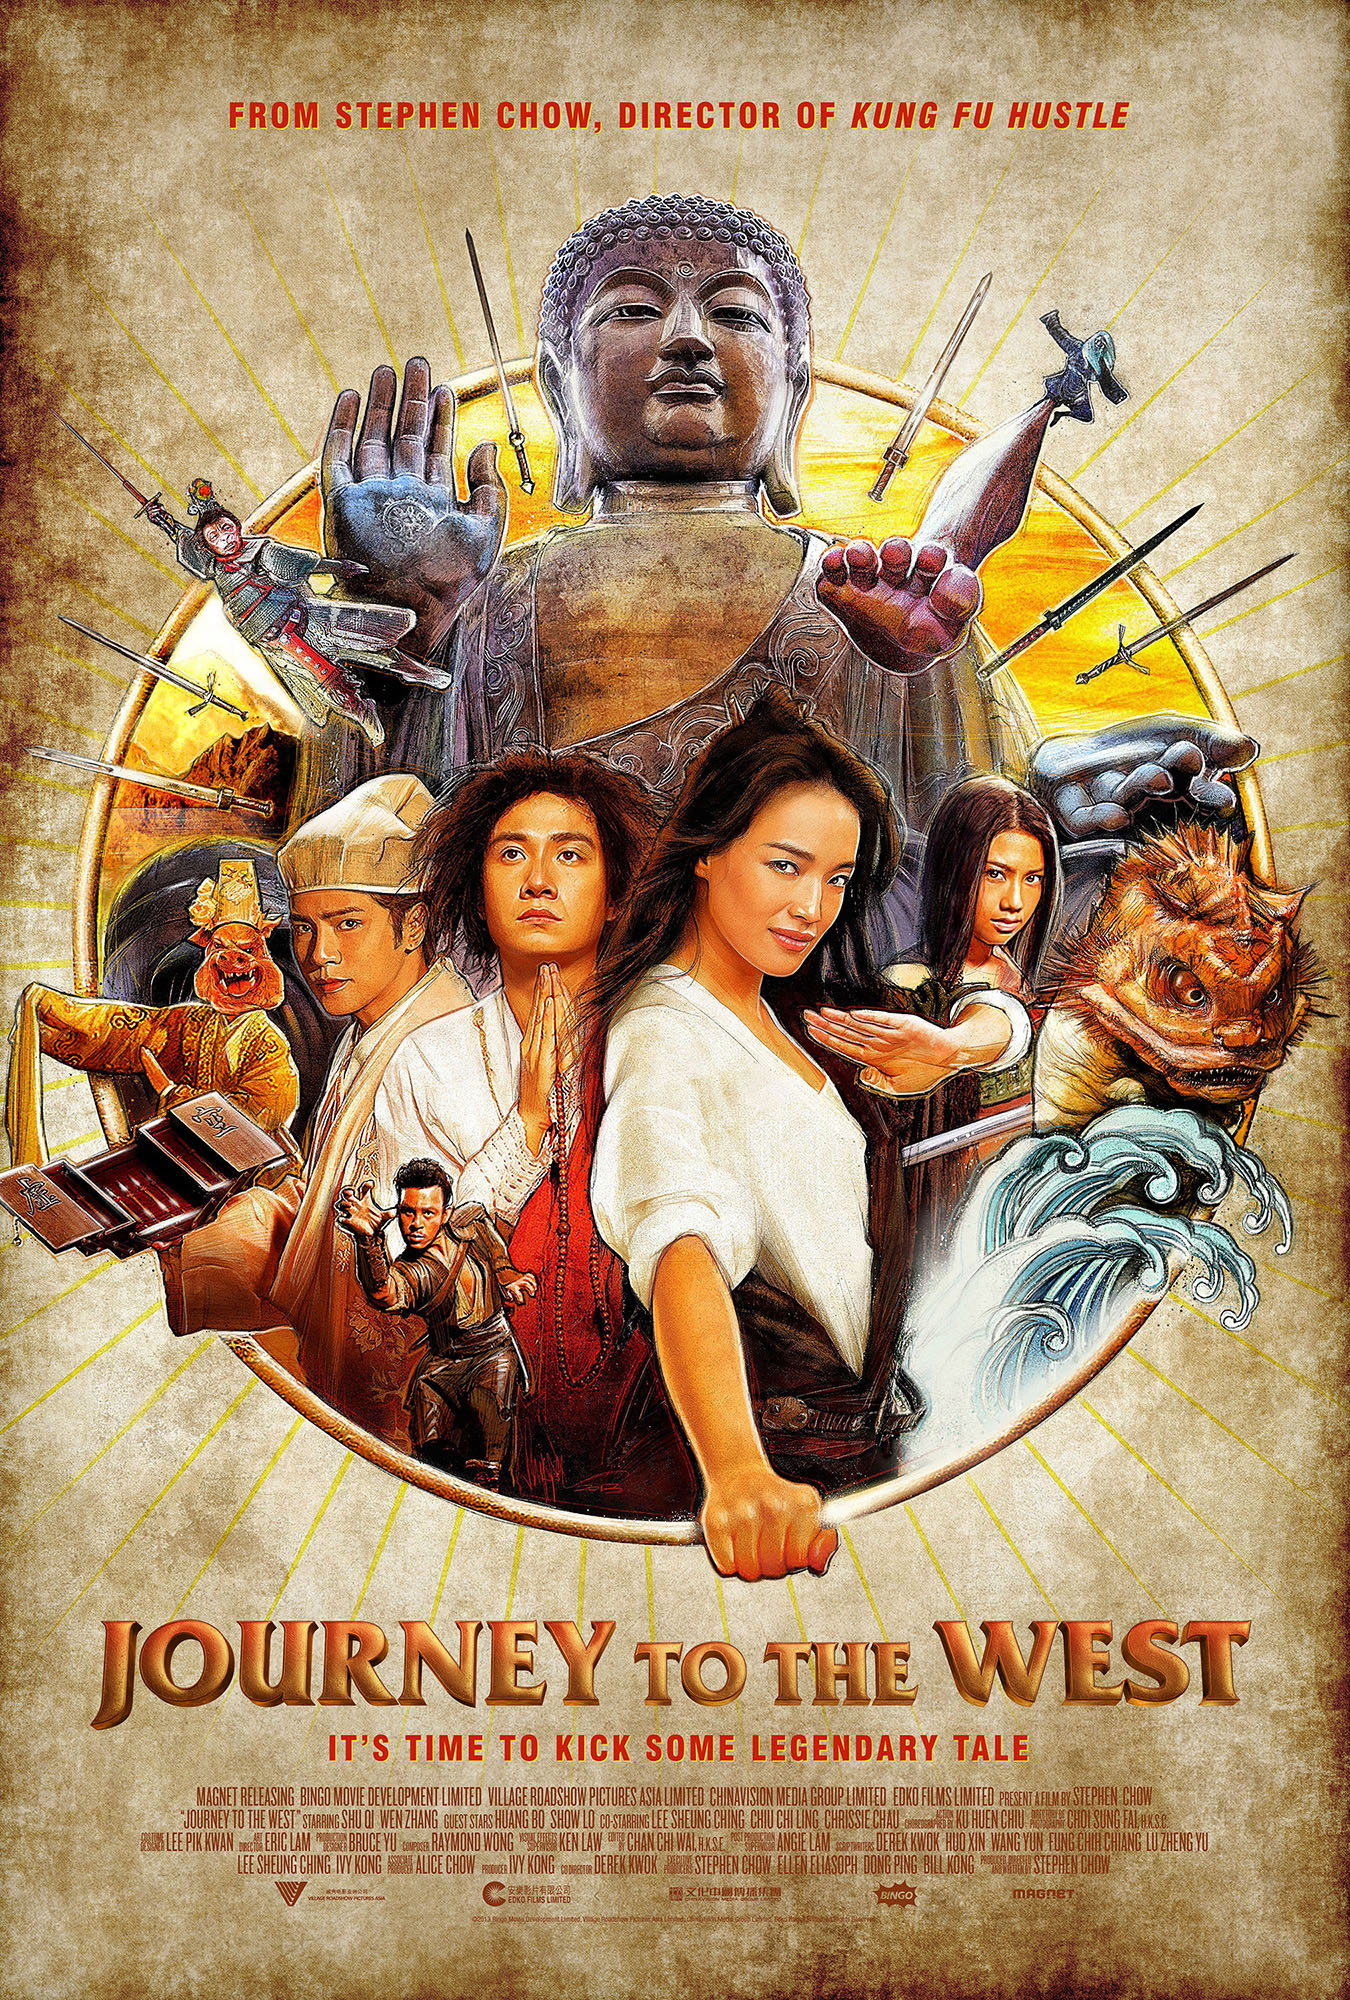 journey to the west book 1